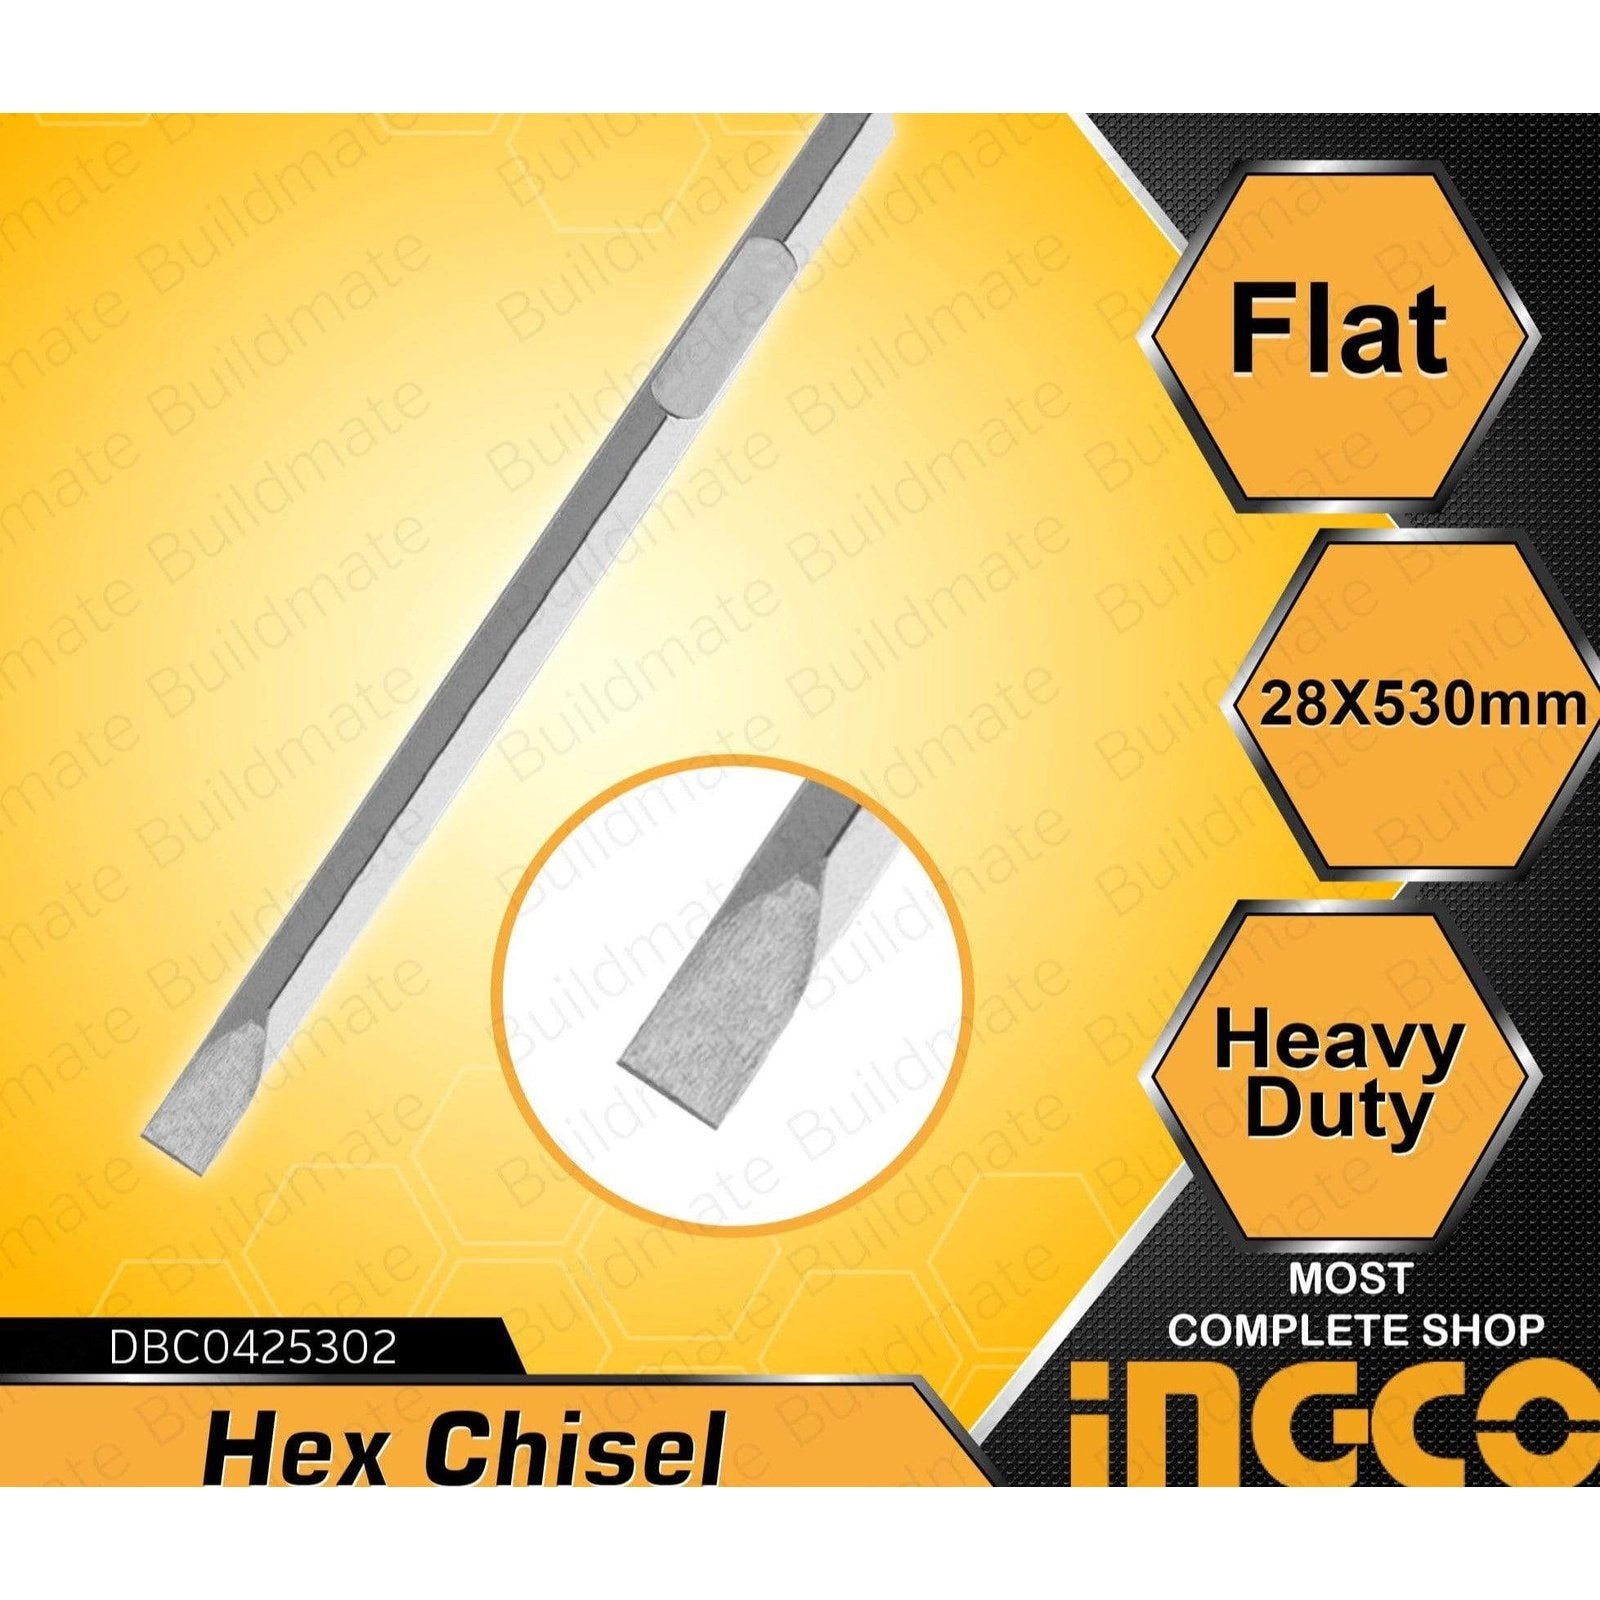 Ingco Hex Chisel | Supply Master | Accra, Ghana Tools 28x530mm Building Steel Engineering Hardware tool